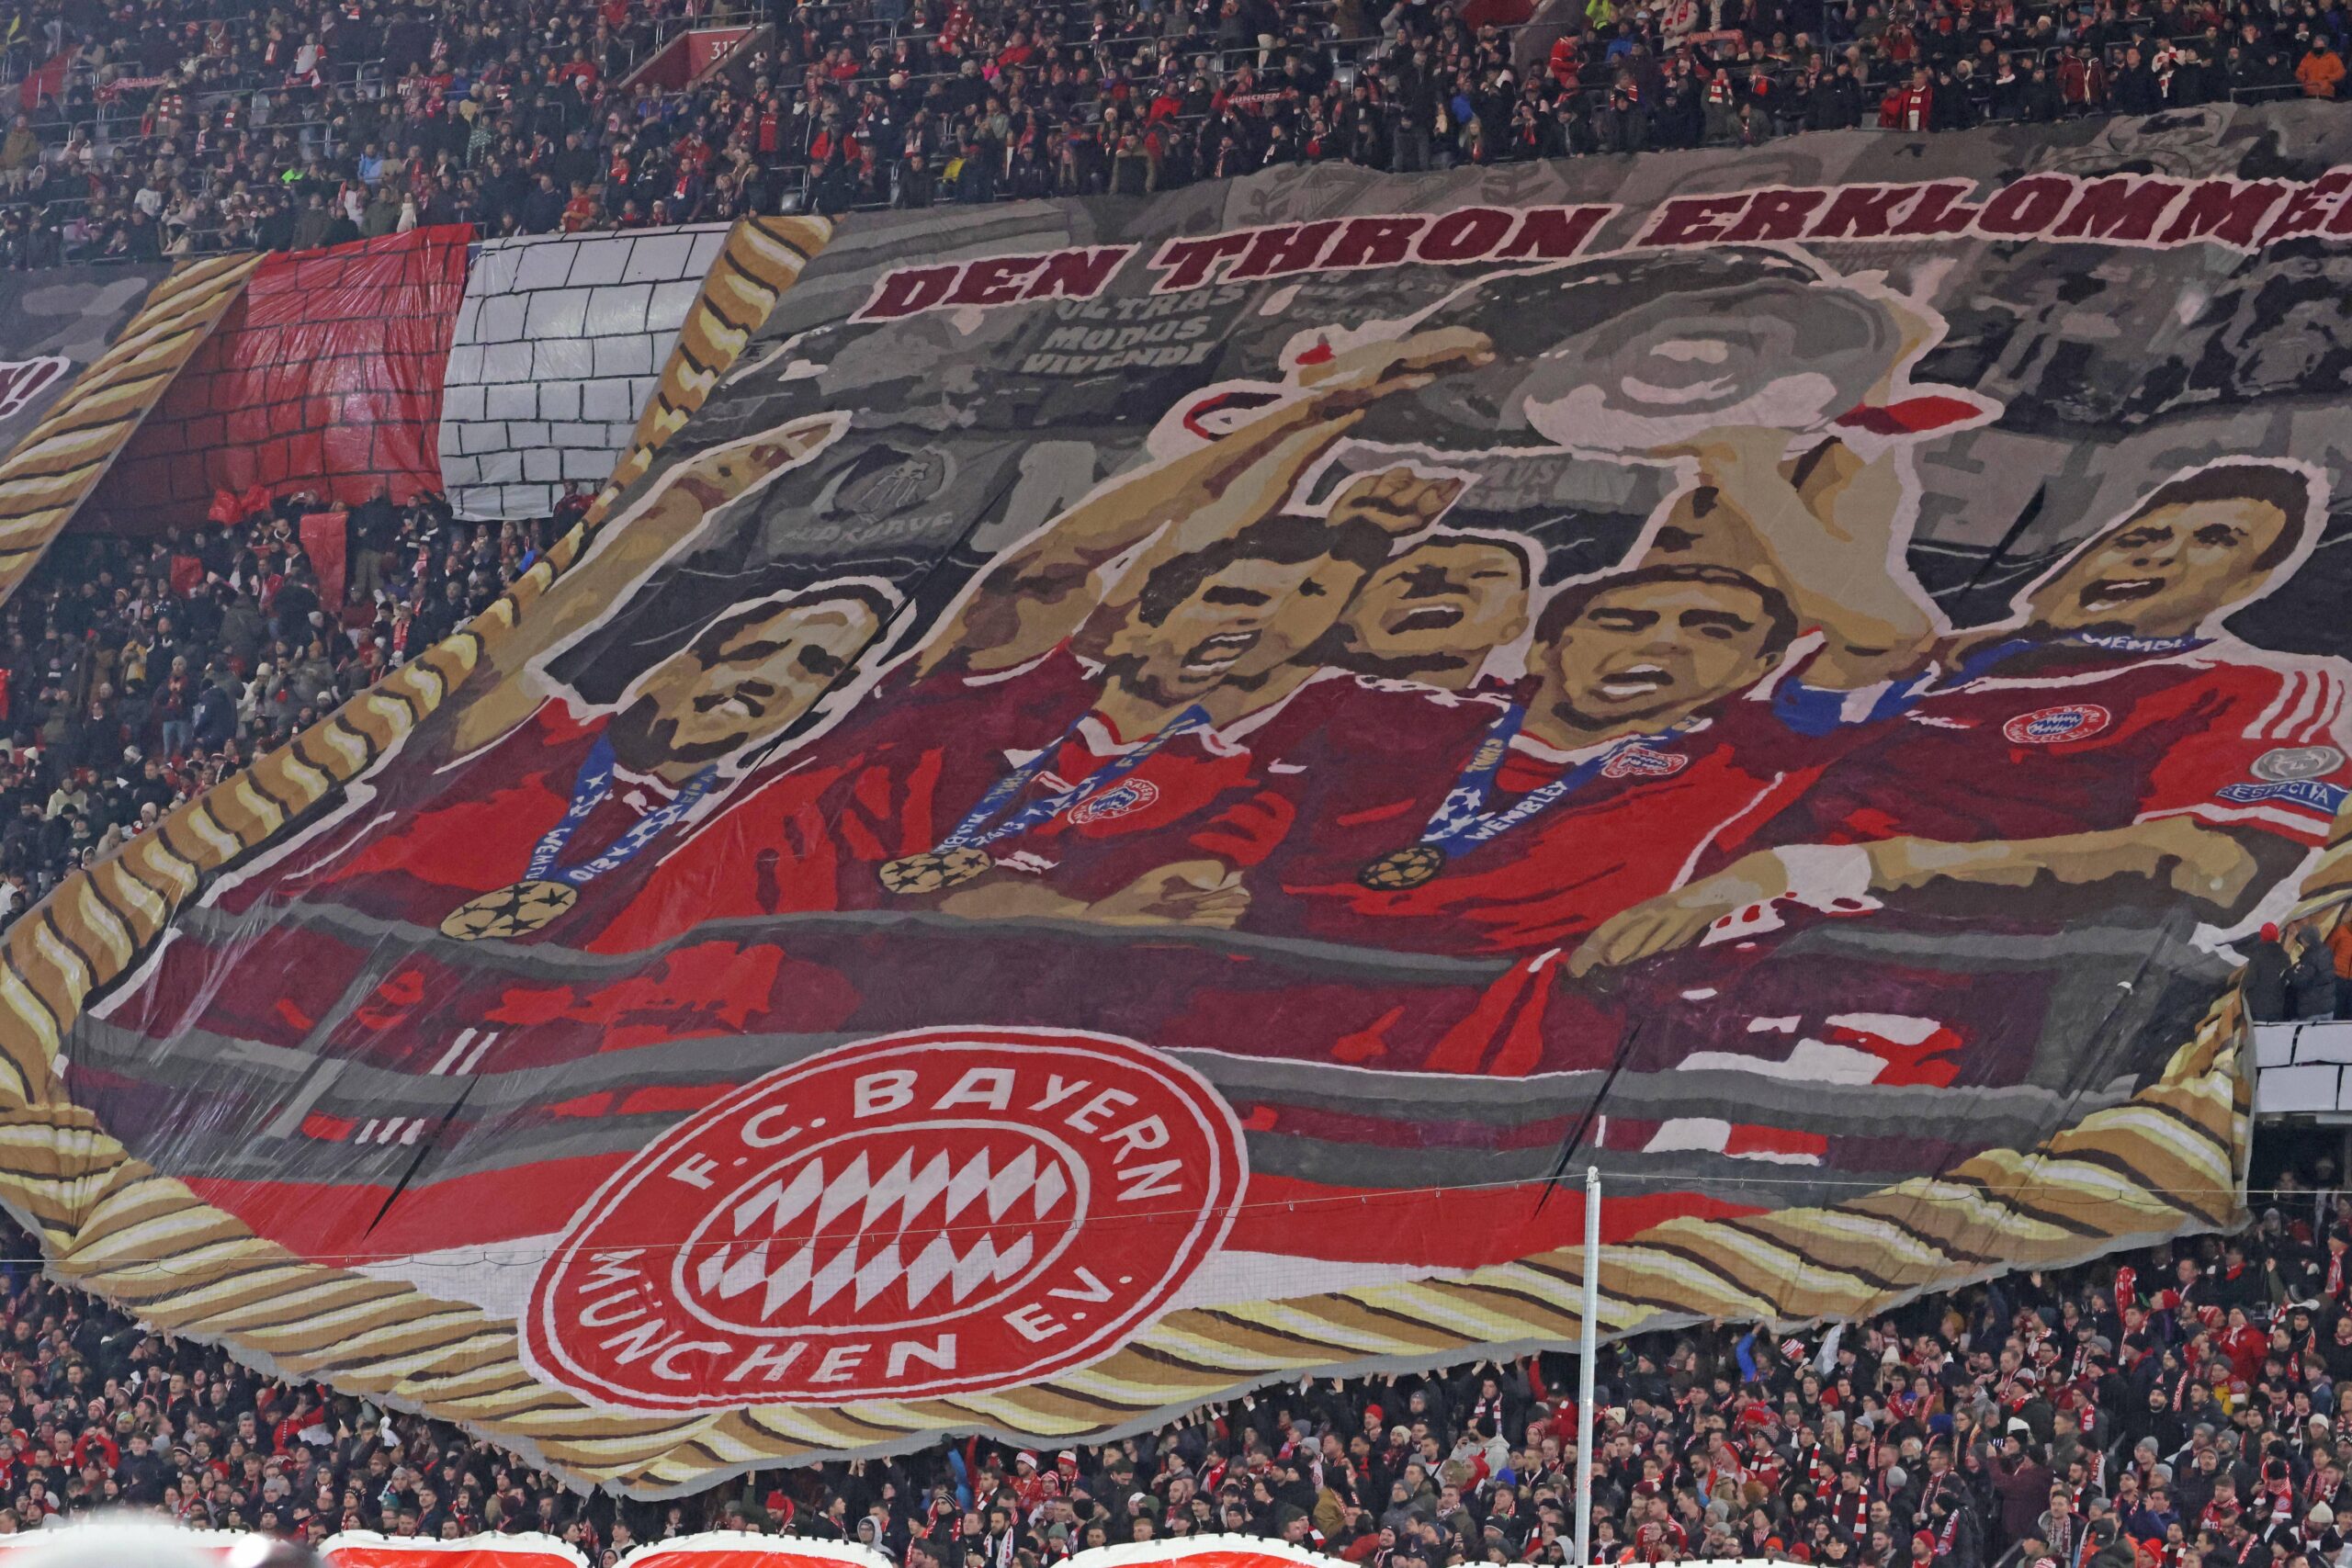 A Bayern Munich fan banner showing the heroes of the 2013 Wembley triumph